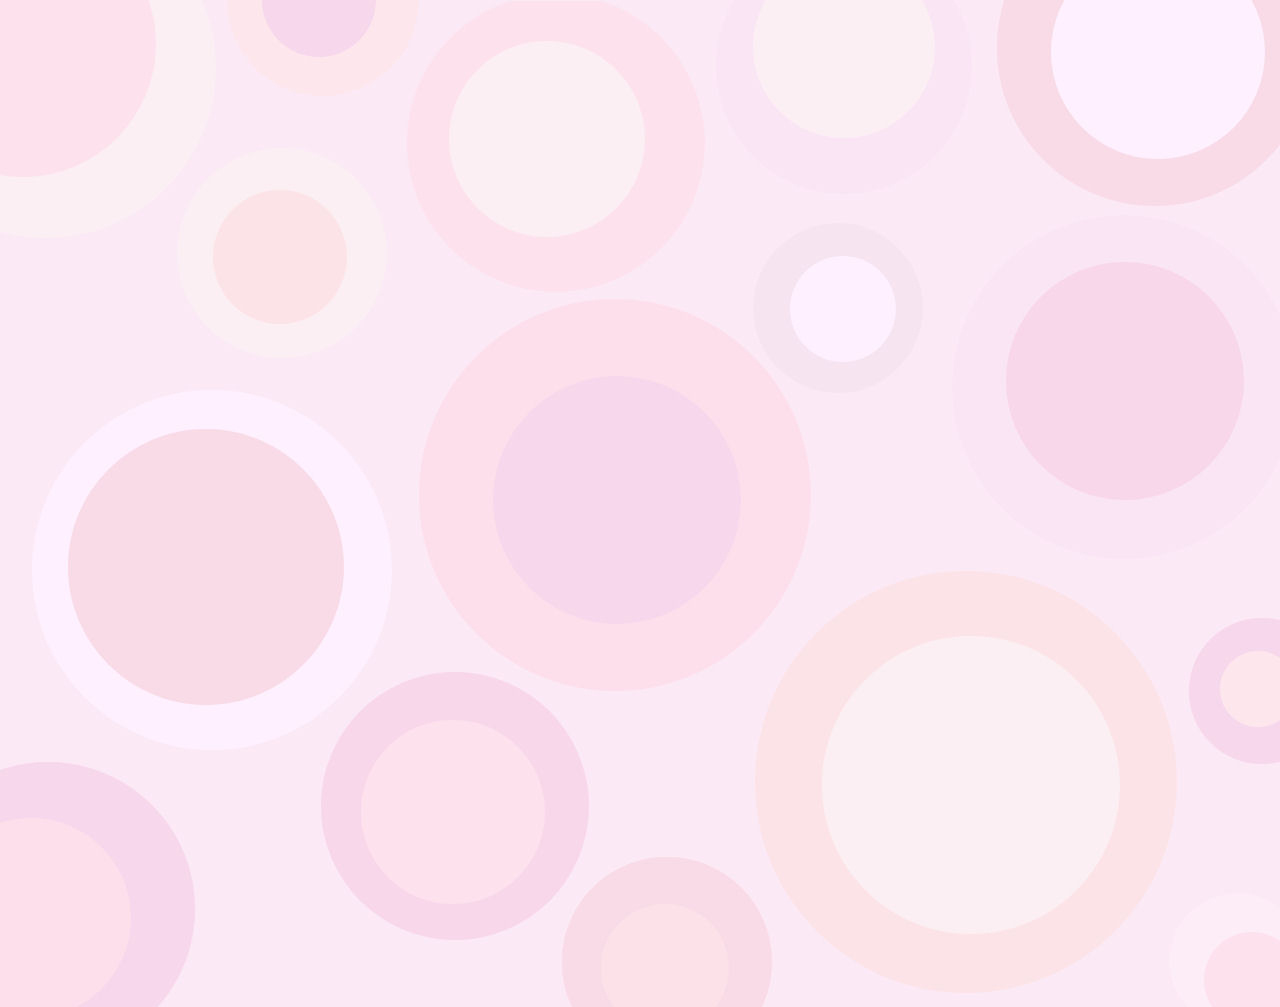 Light Pink Wallpaper Related Keywords amp Suggestions